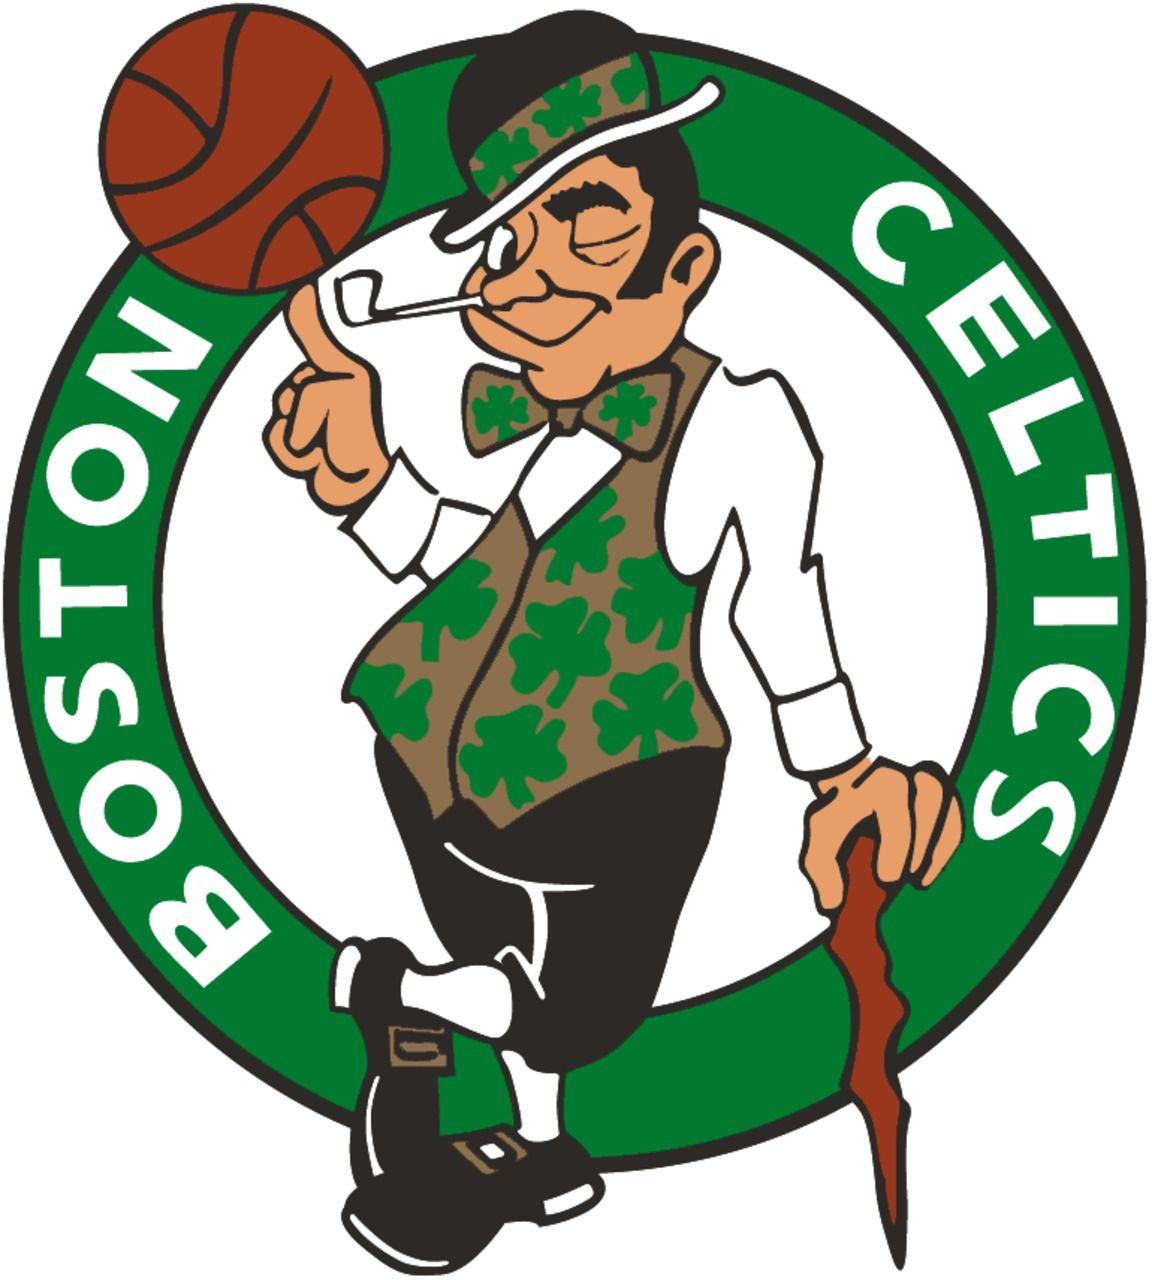 NBA Logo - The best and worst NBA logos from each team